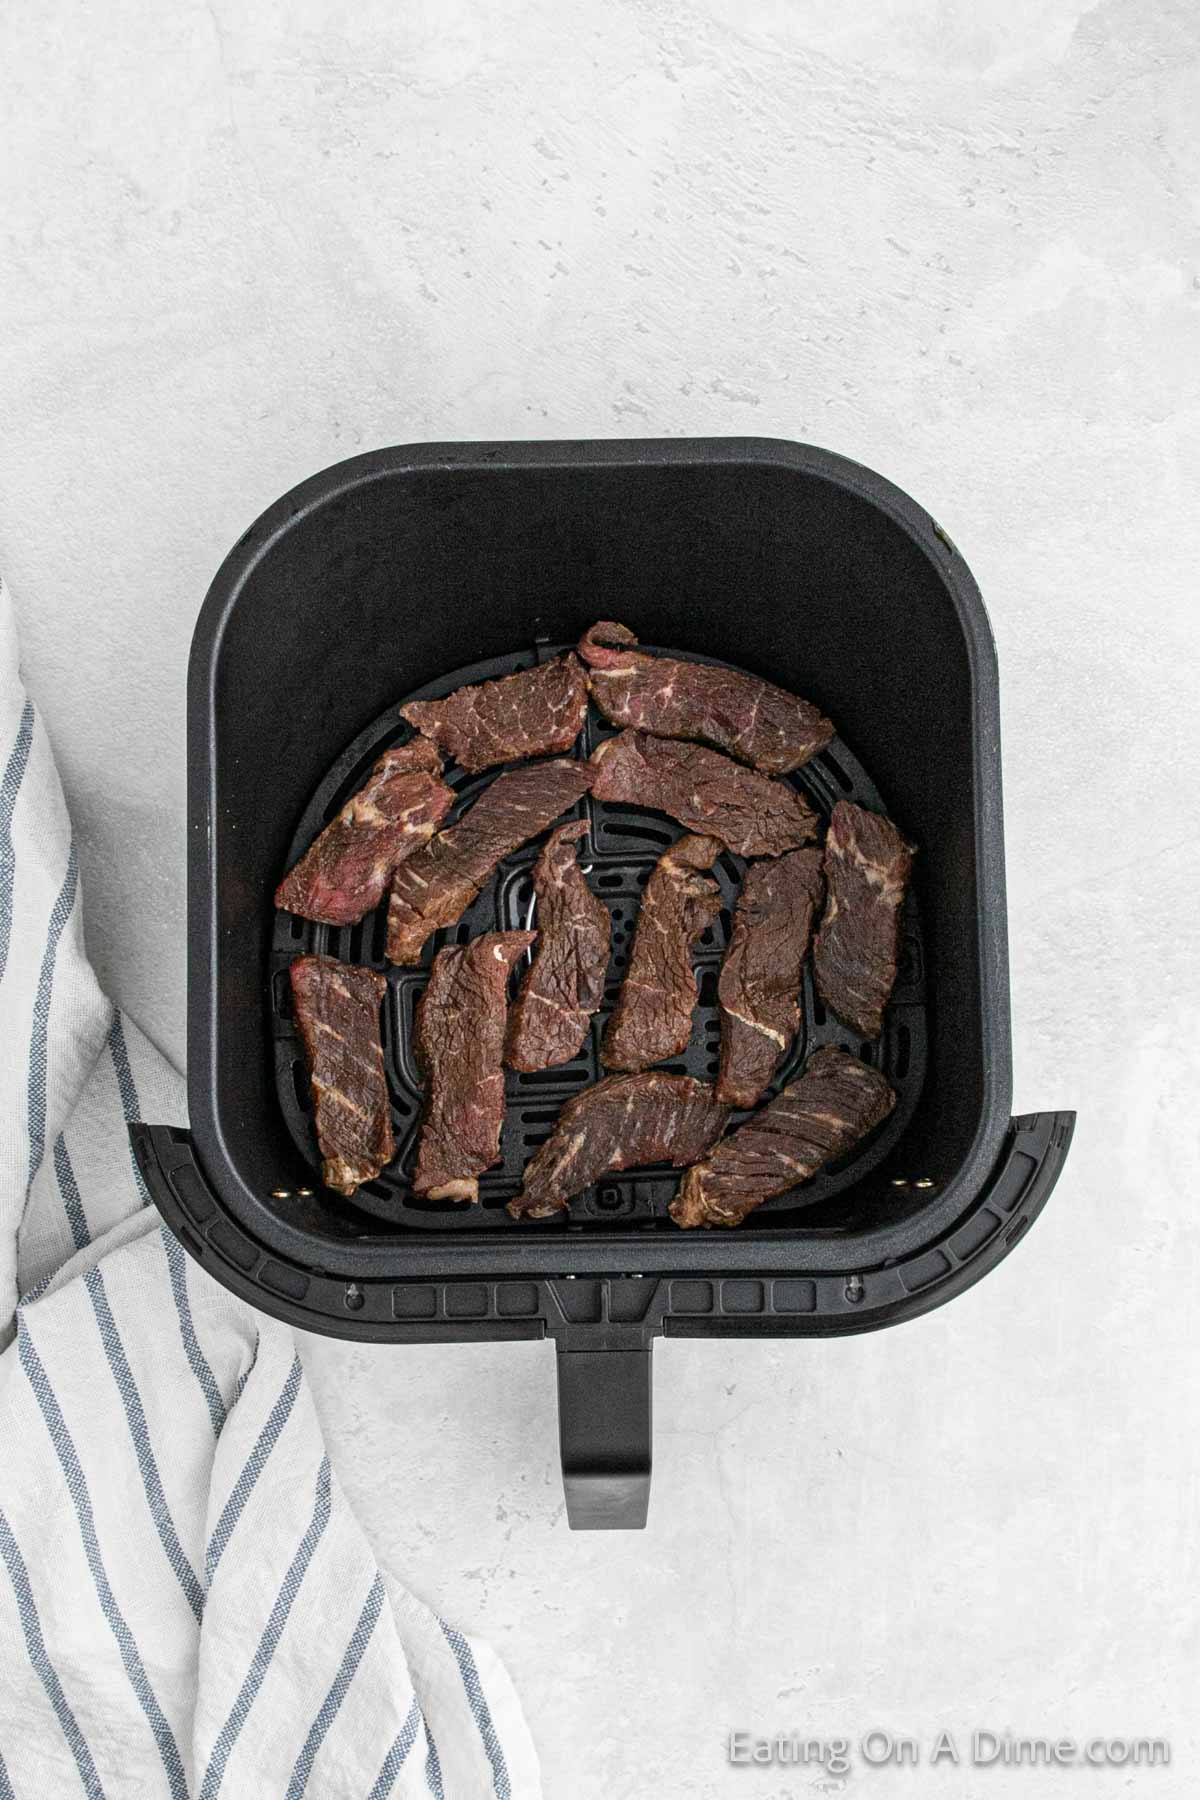 Beef strips in the air fryer